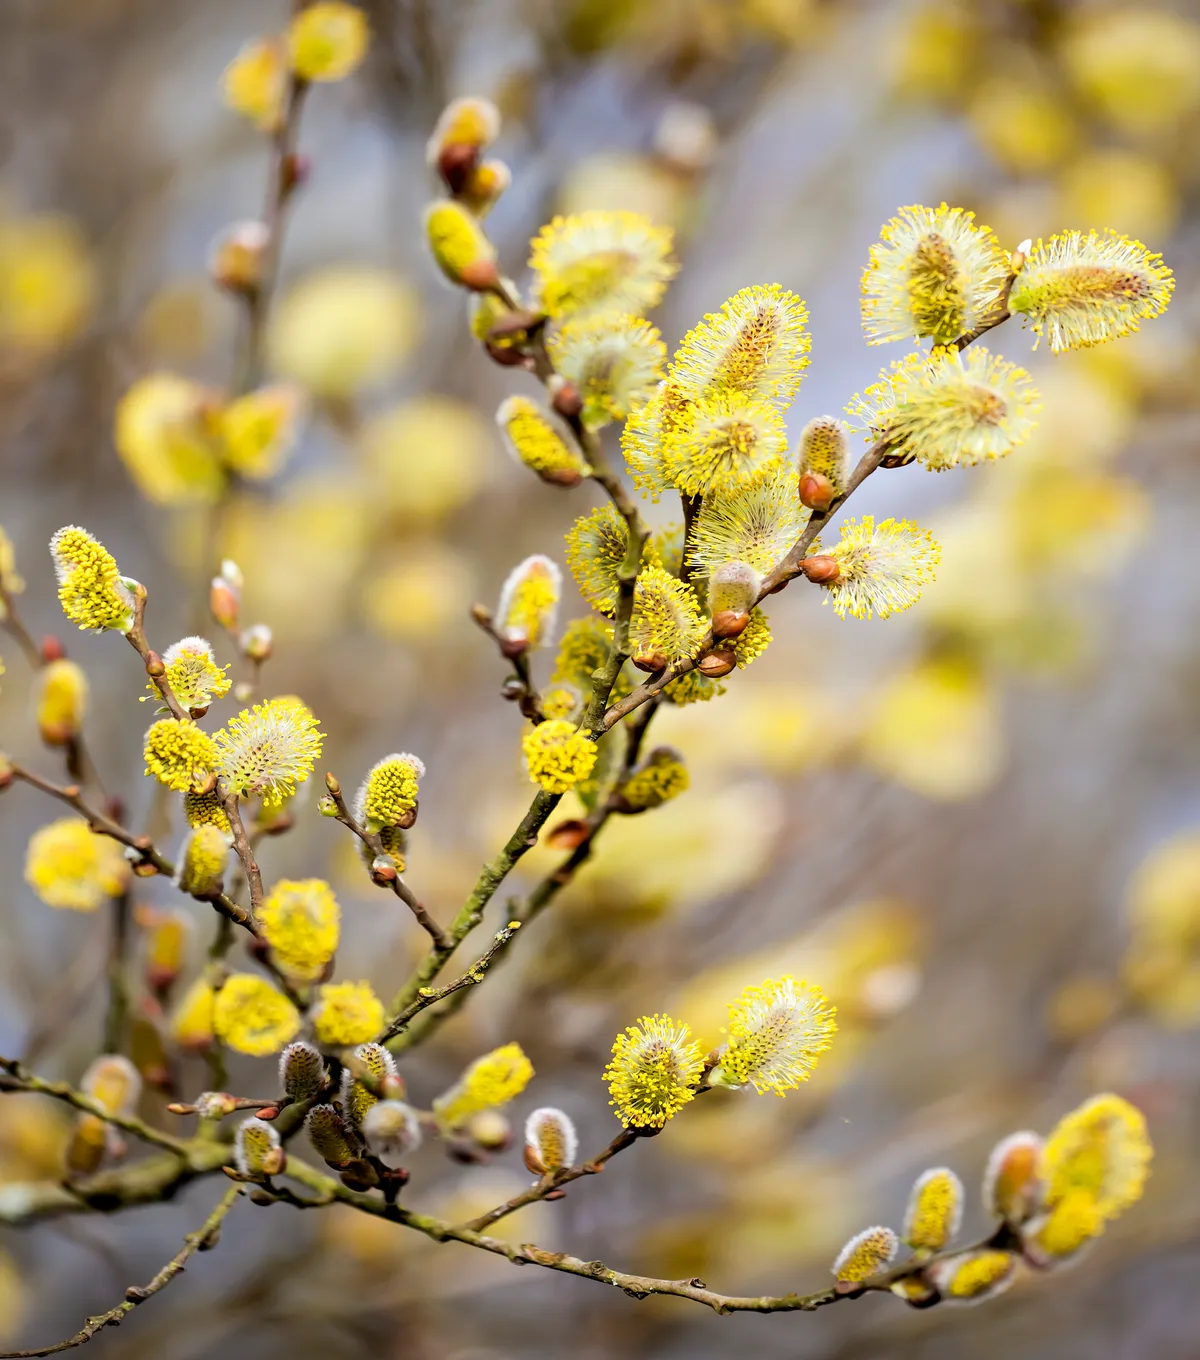 Male catkins on a branch. © mikroman6/Getty.